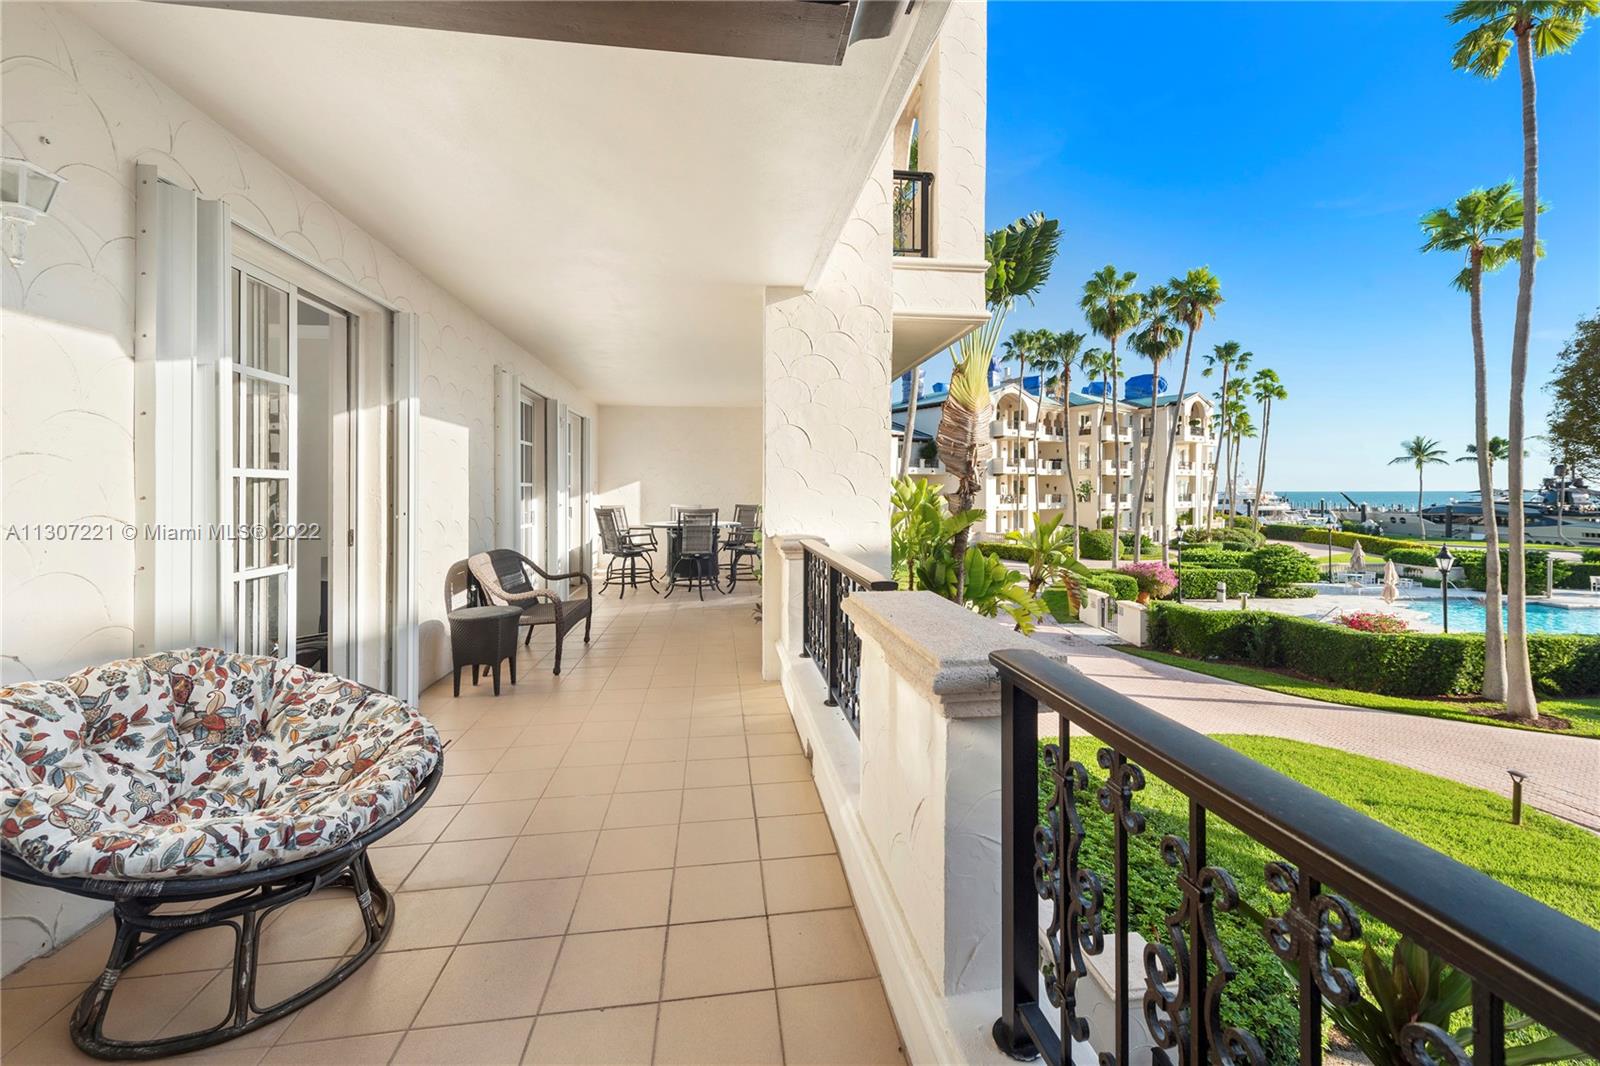 Listing Image 2124 Fisher Island Dr #2124